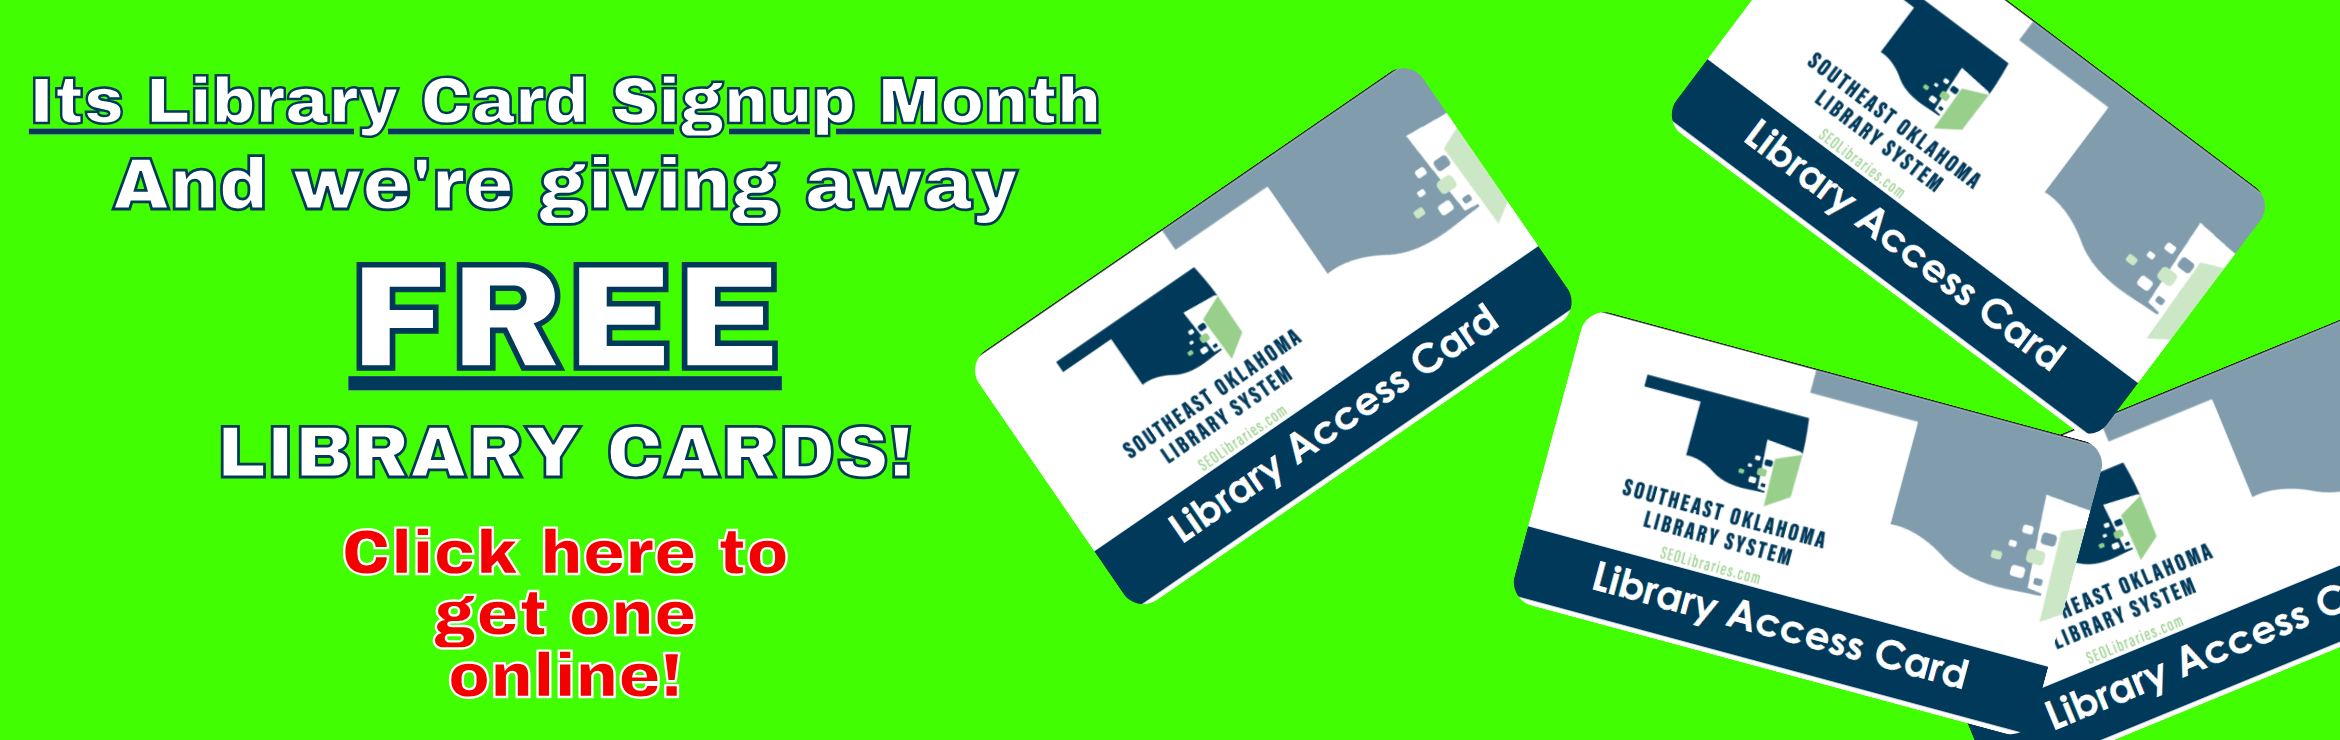 Library Card Signup Month - FREE Library Cards!